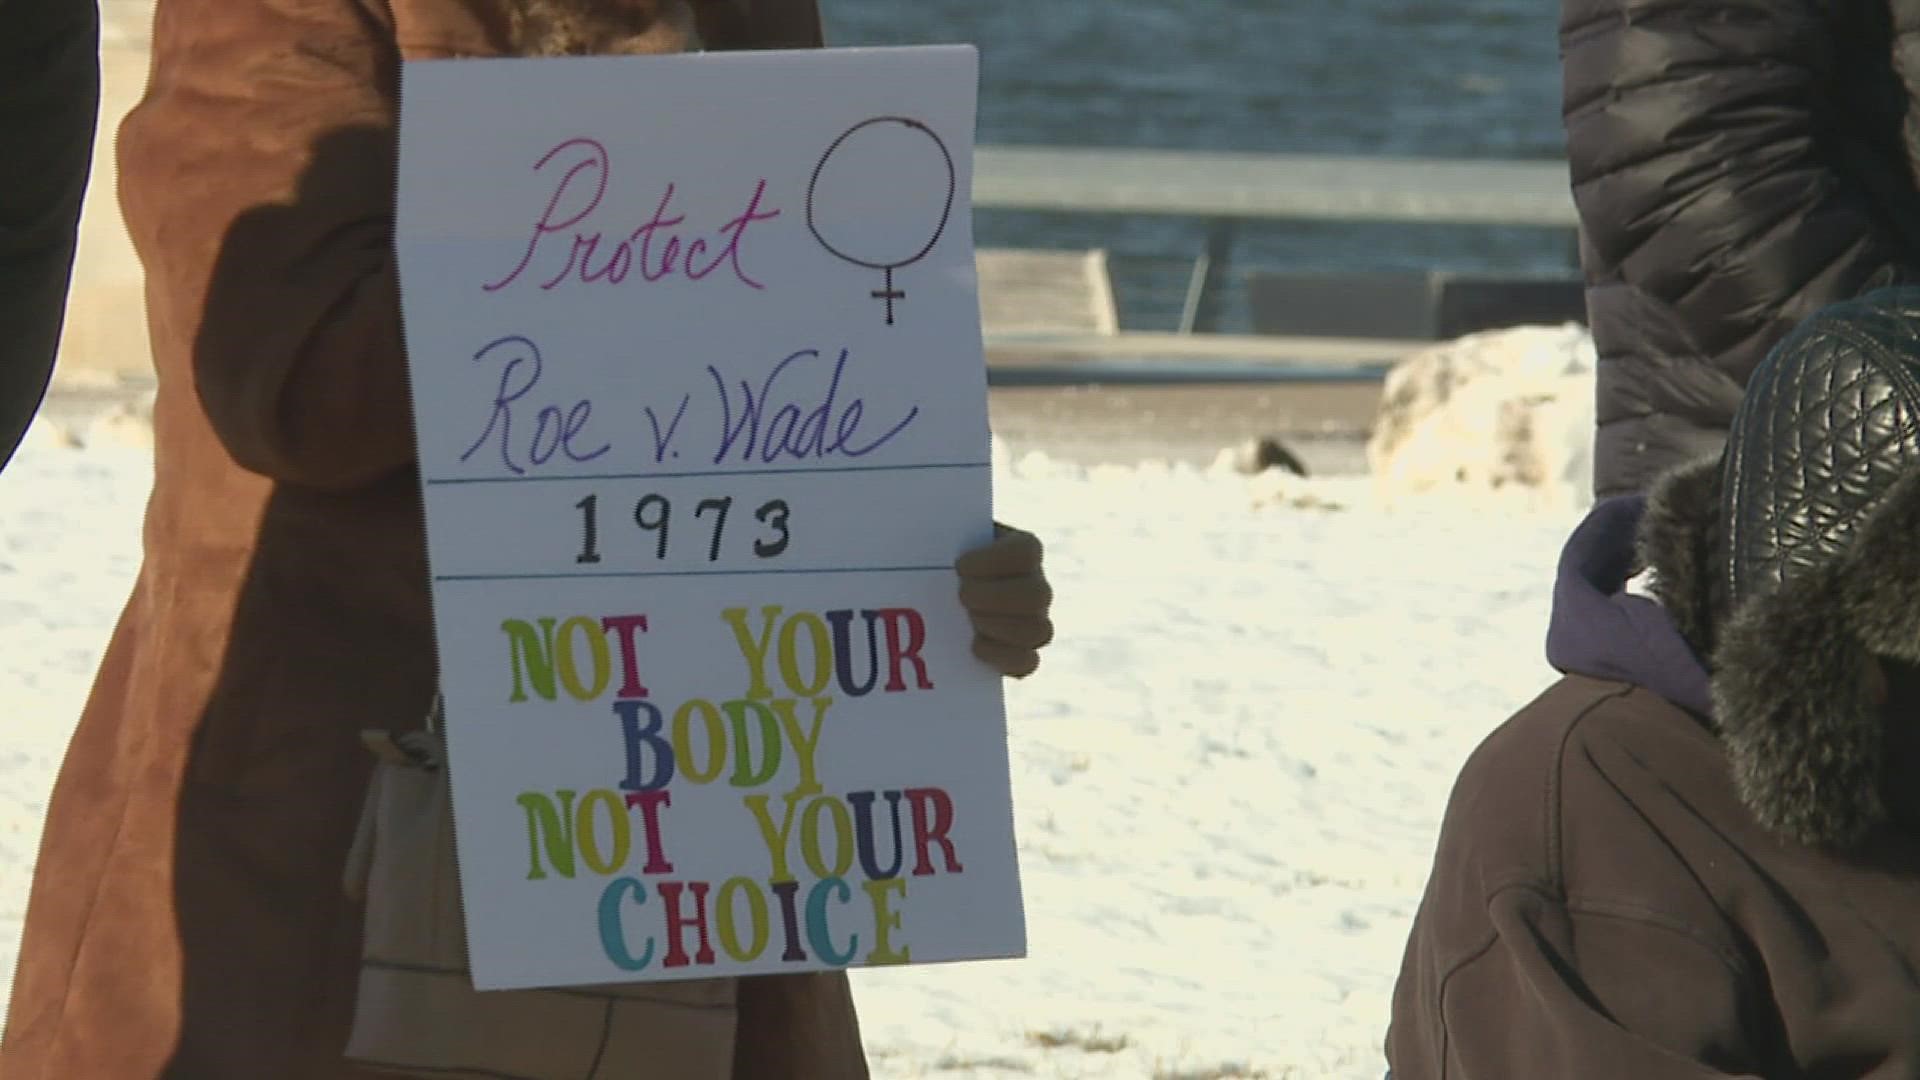 On Saturday, Jan. 22, local leaders and activists rallied in Rock Island to support a woman's right to choose.